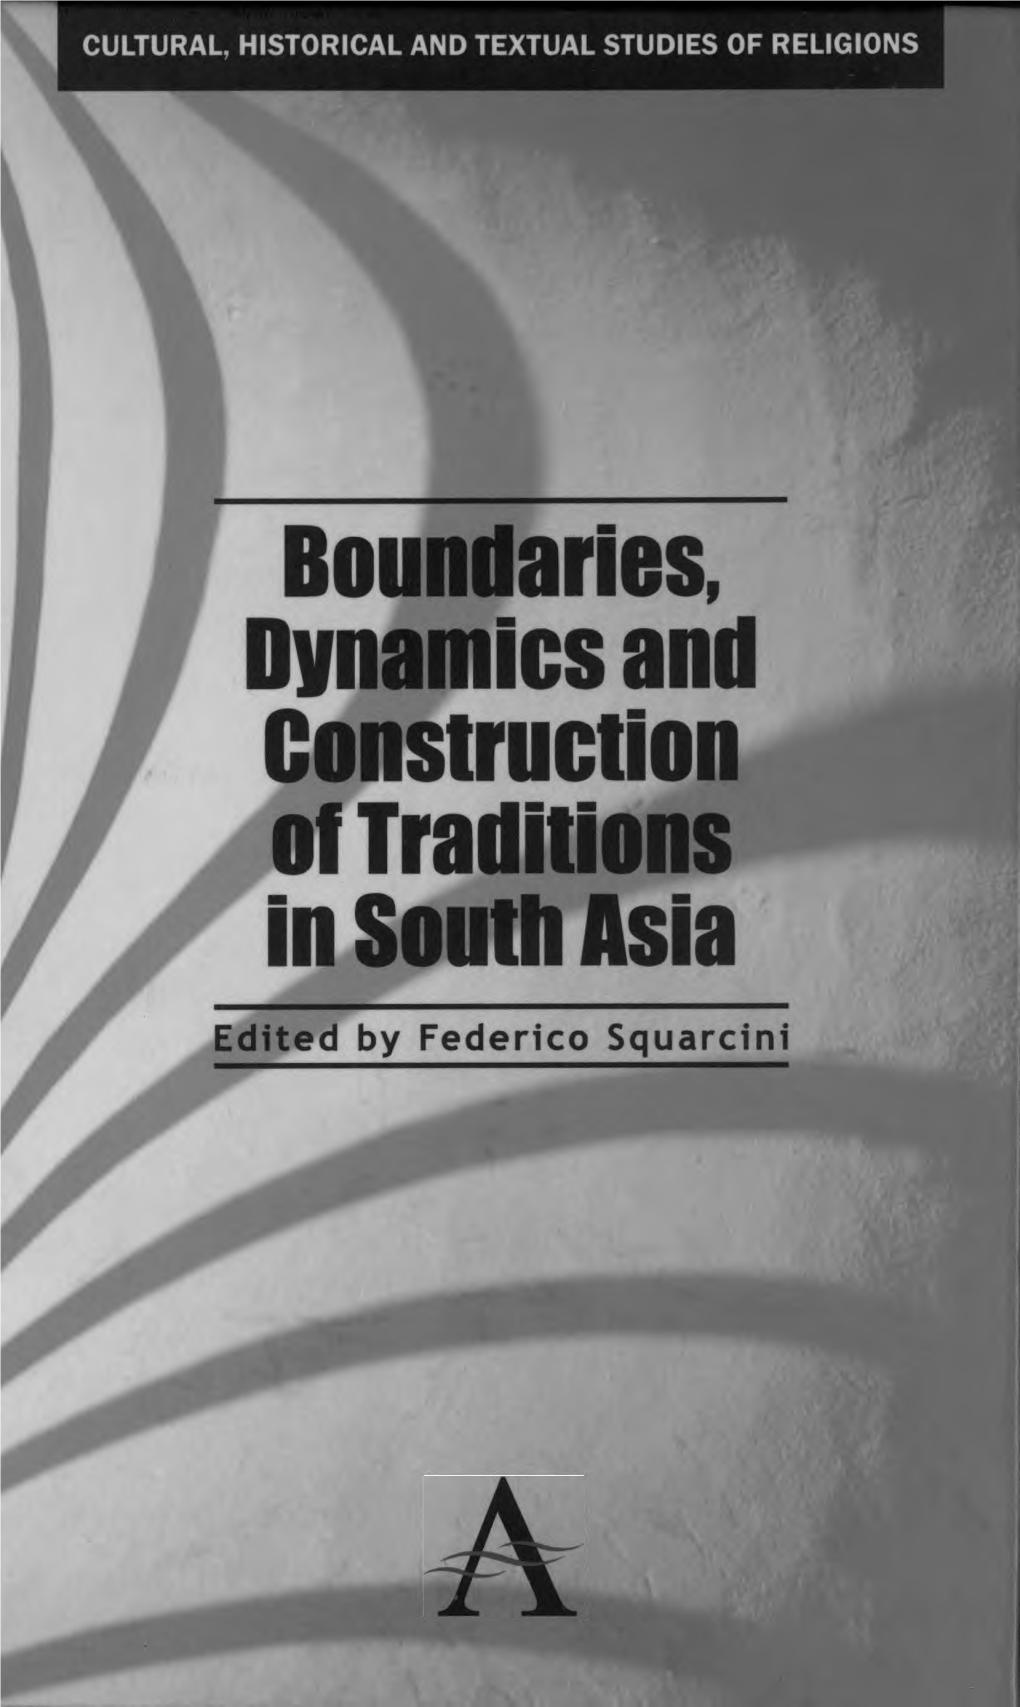 Boundaries, Dynamics and Construction of Traditions in South